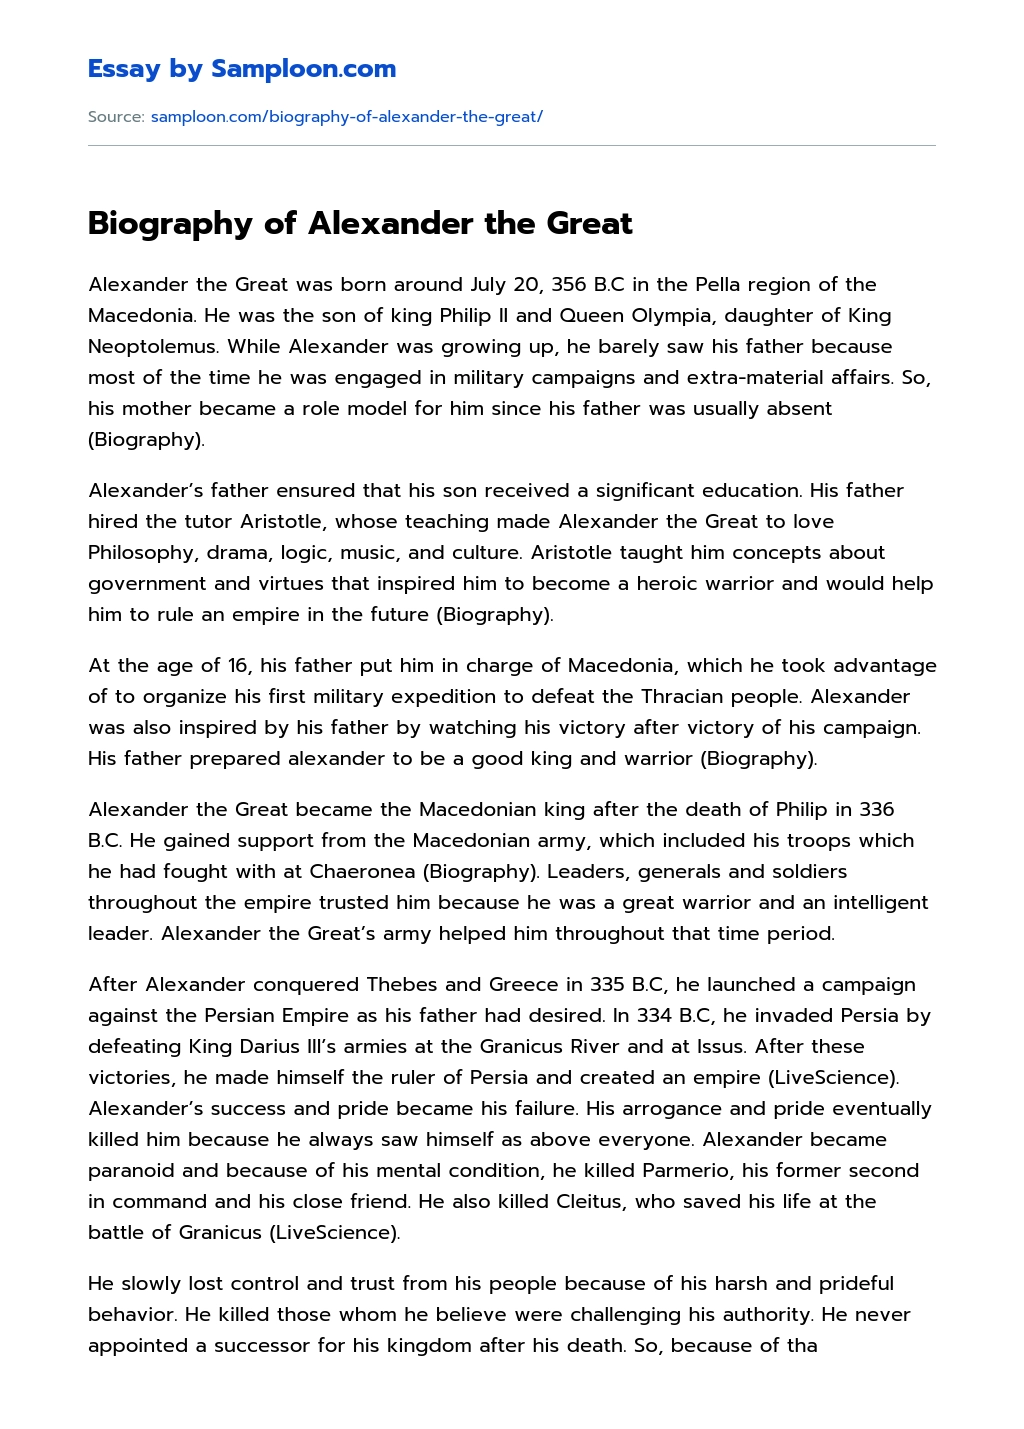 Biography of Alexander the Great essay